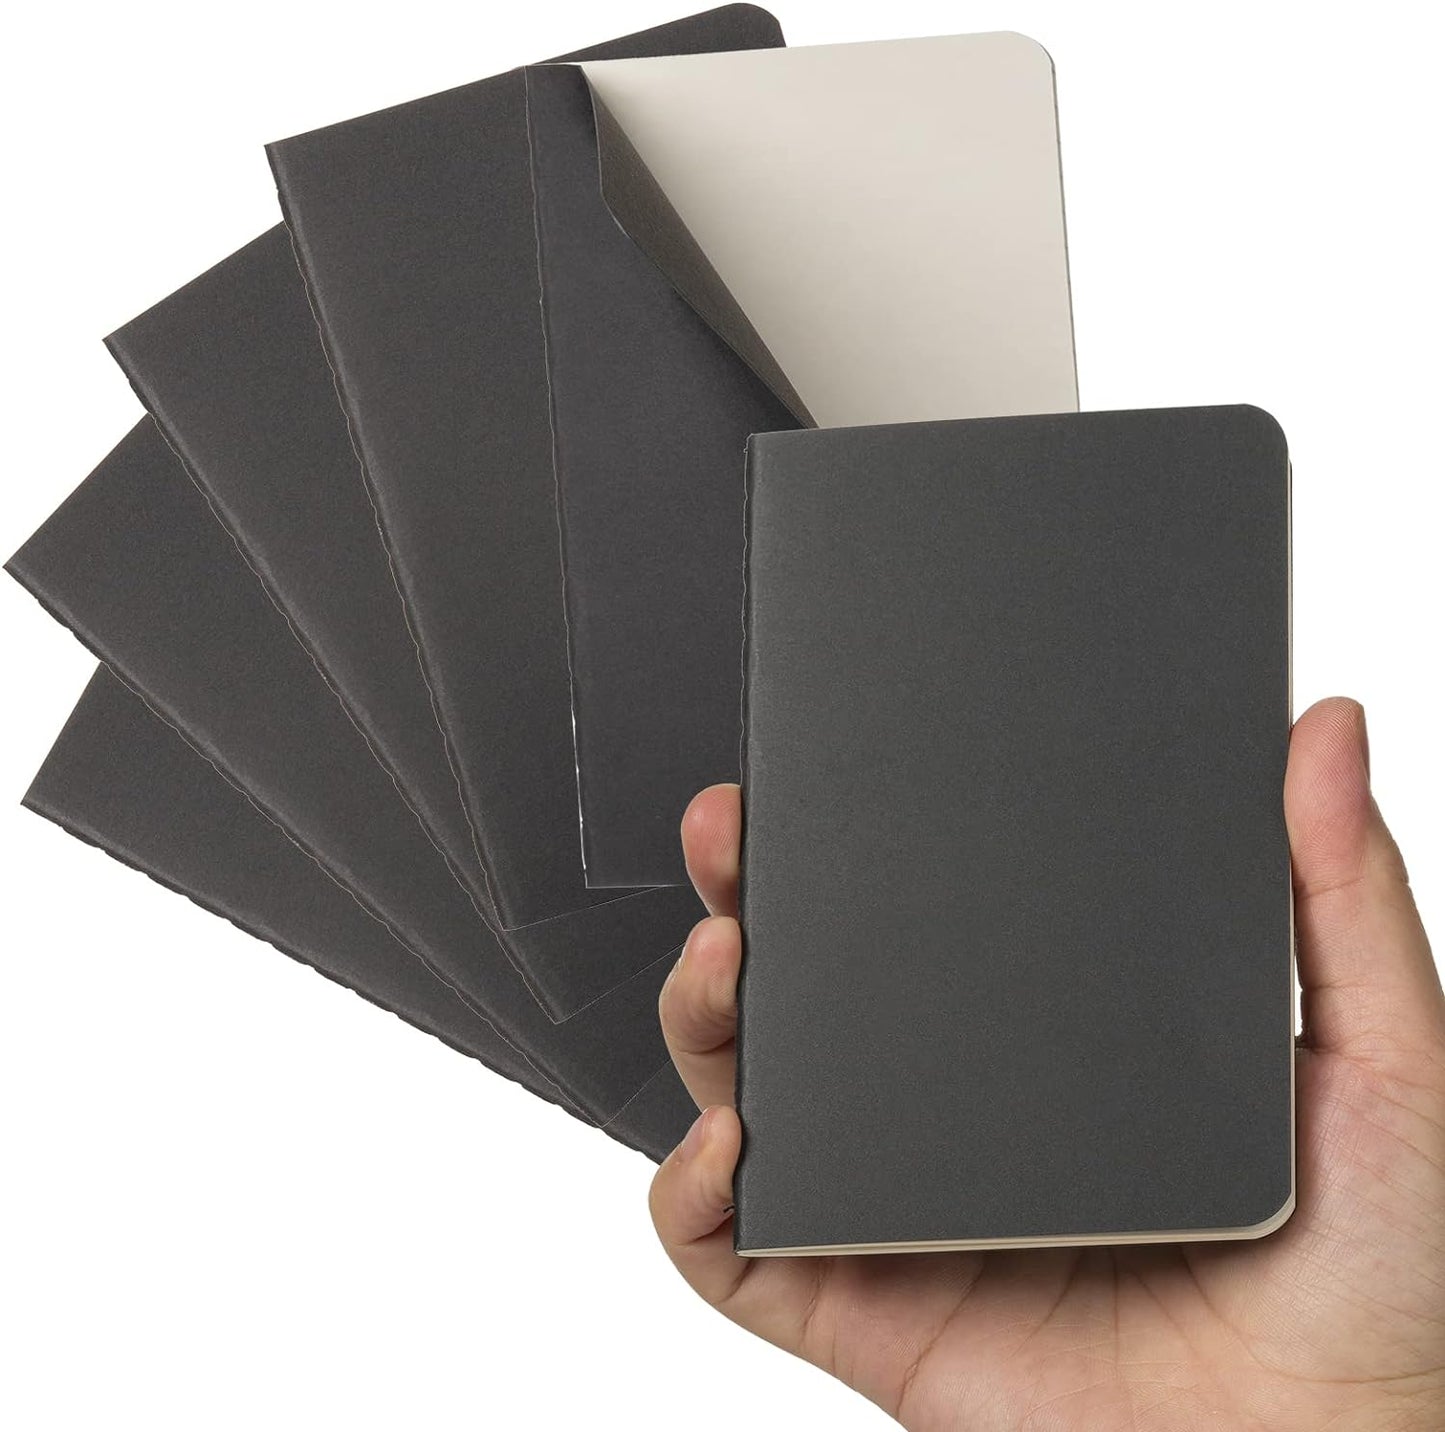 Pocket Notebook, 6 Pack Softcover Mini Notebooks 3.5" X 5.5" Black Notebook Small Memo Notepad for Men Women Kids Traveler Author, 30 Sheets,60 Lined Pages